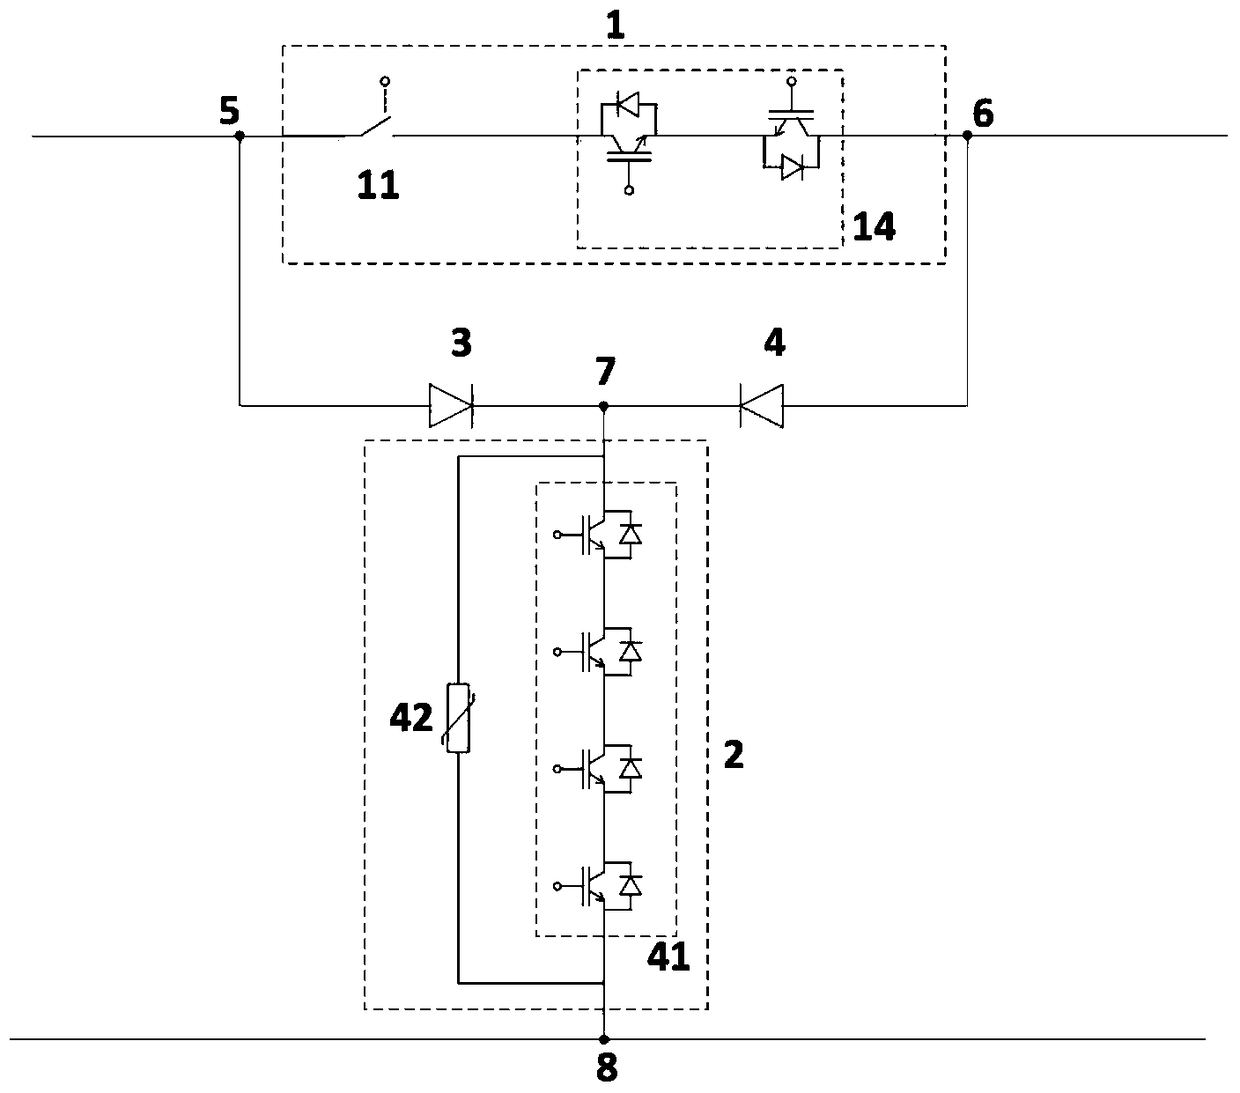 A DC circuit breaker topology with bidirectional blocking function